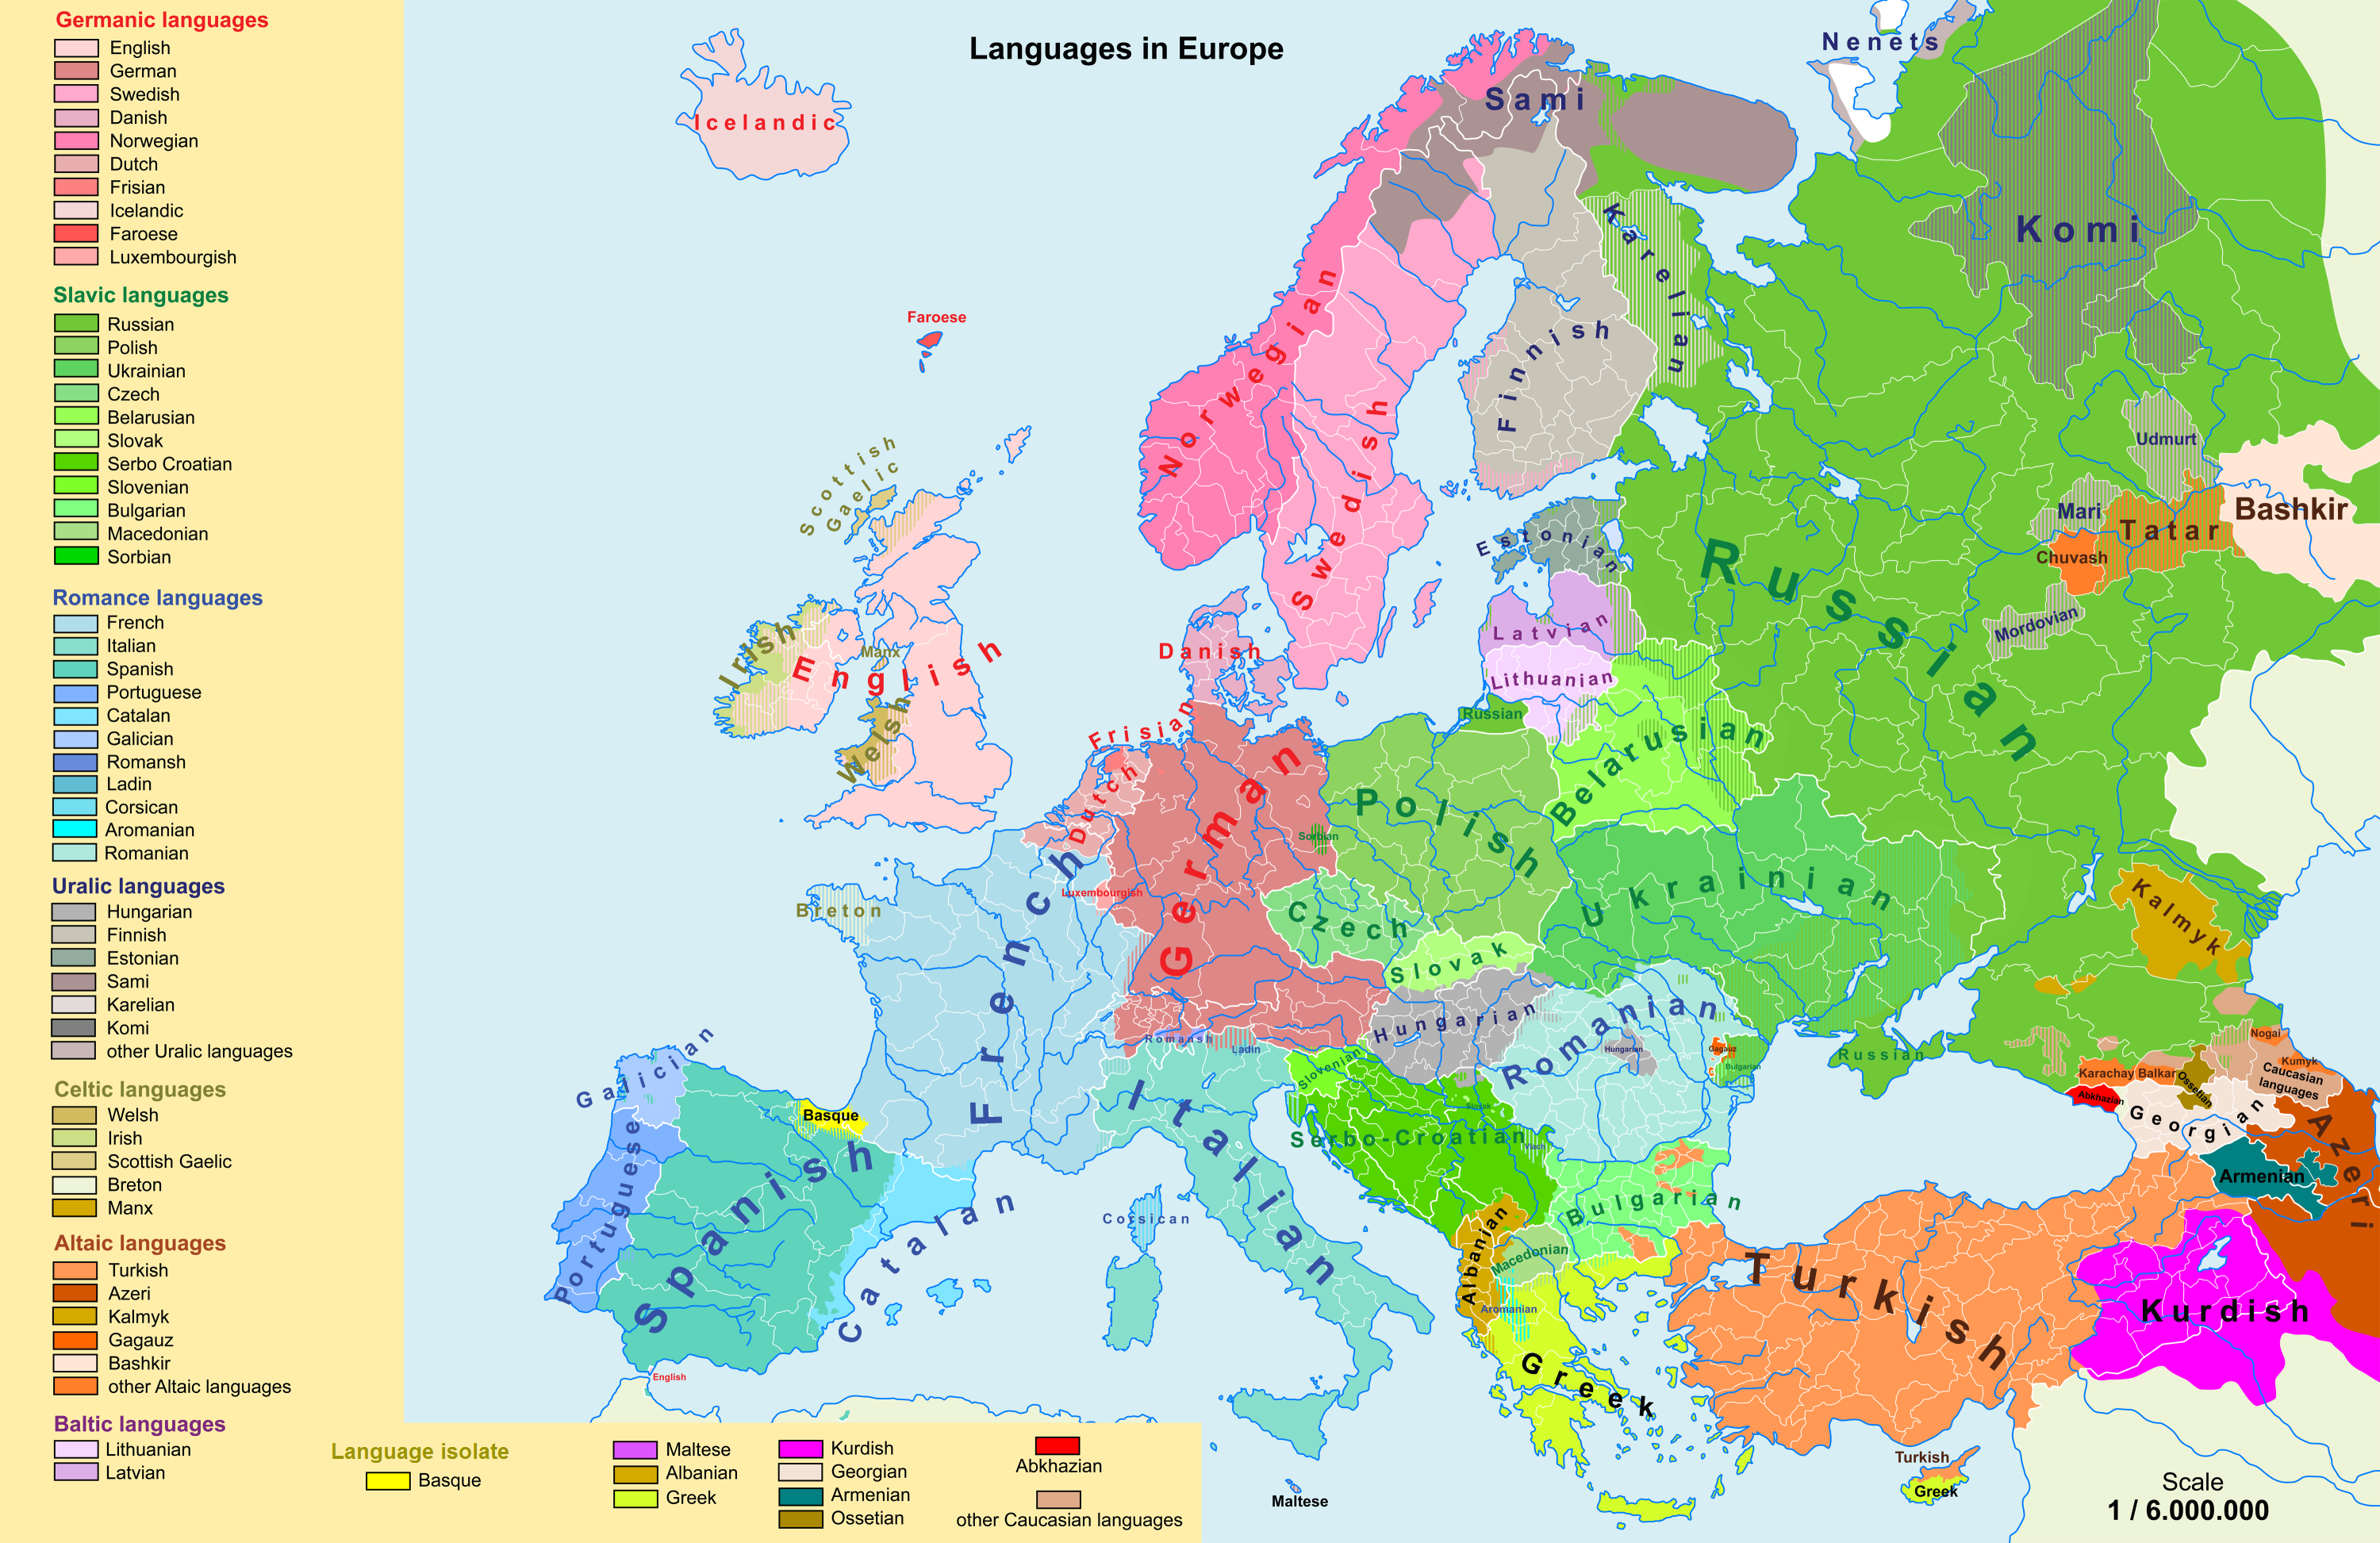 http://upload.wikimedia.org/wikipedia/commons/1/14/Languages_of_Europe_map.png